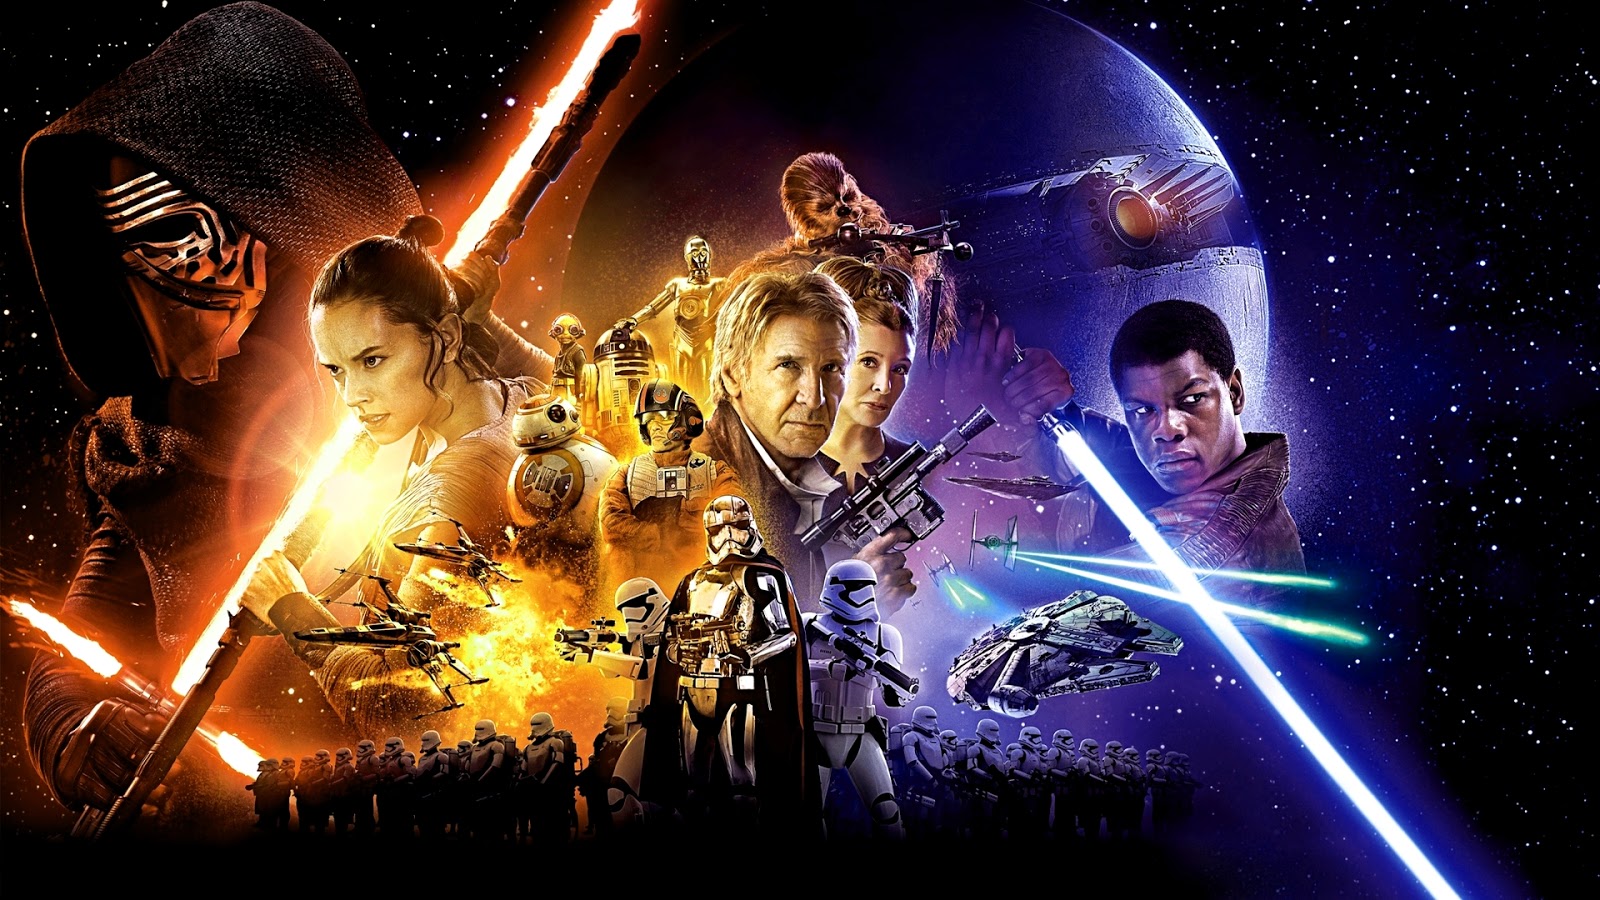 Star Wars The Force Awakens - Main - 1920x1080 Wallpapers ...